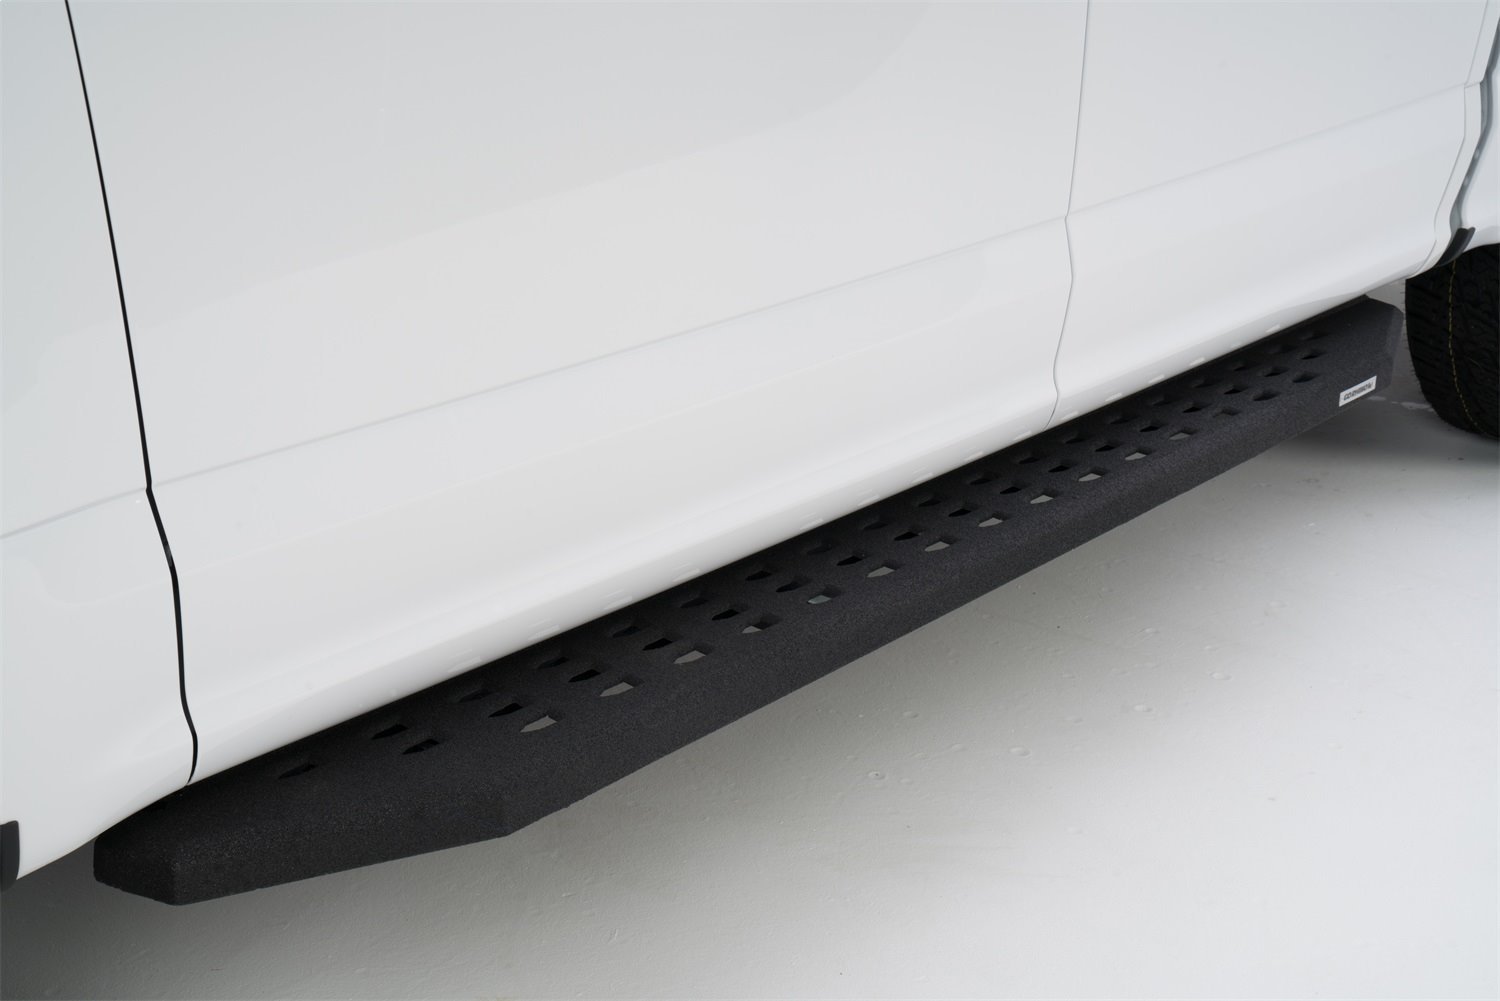 RB20 Running boards for 2015-2017 Ford F150/2017 Ford